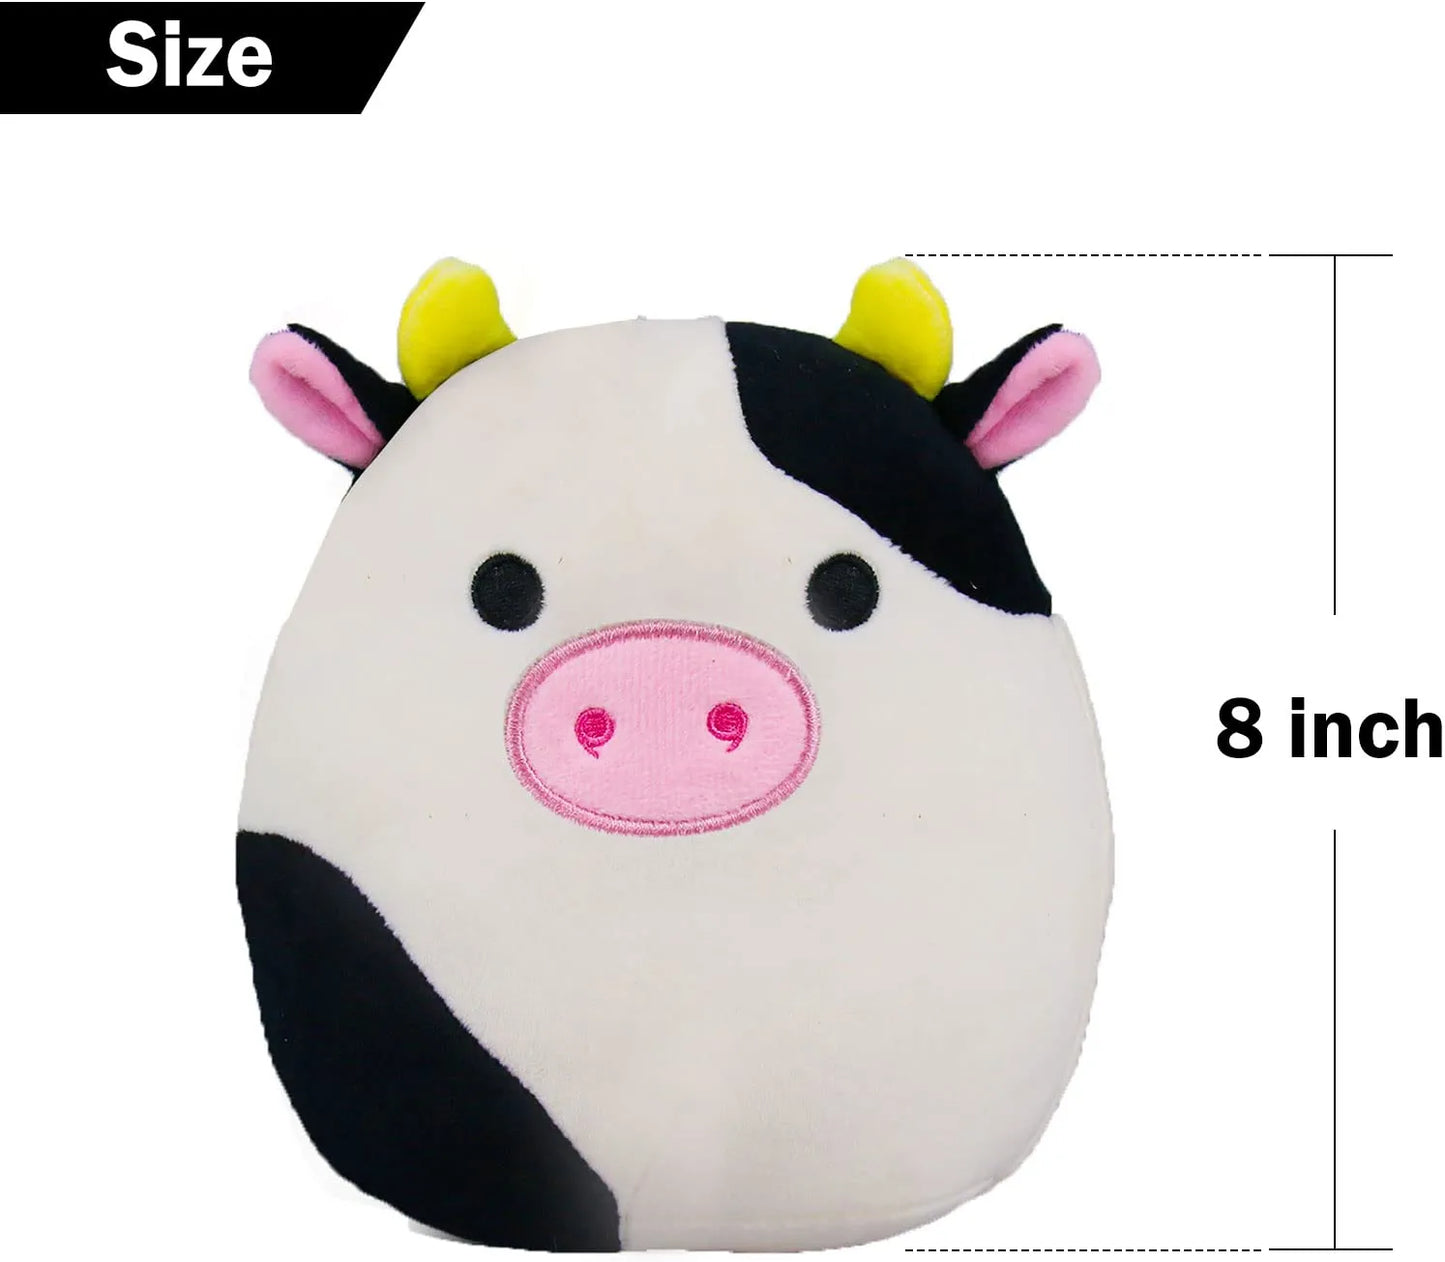 8 Inch Cow Plush Pillow,Cute Soft Cow Stuffed Animals Plushie Toy,Great Gift for Kids Girlfriend Christmas Birthday